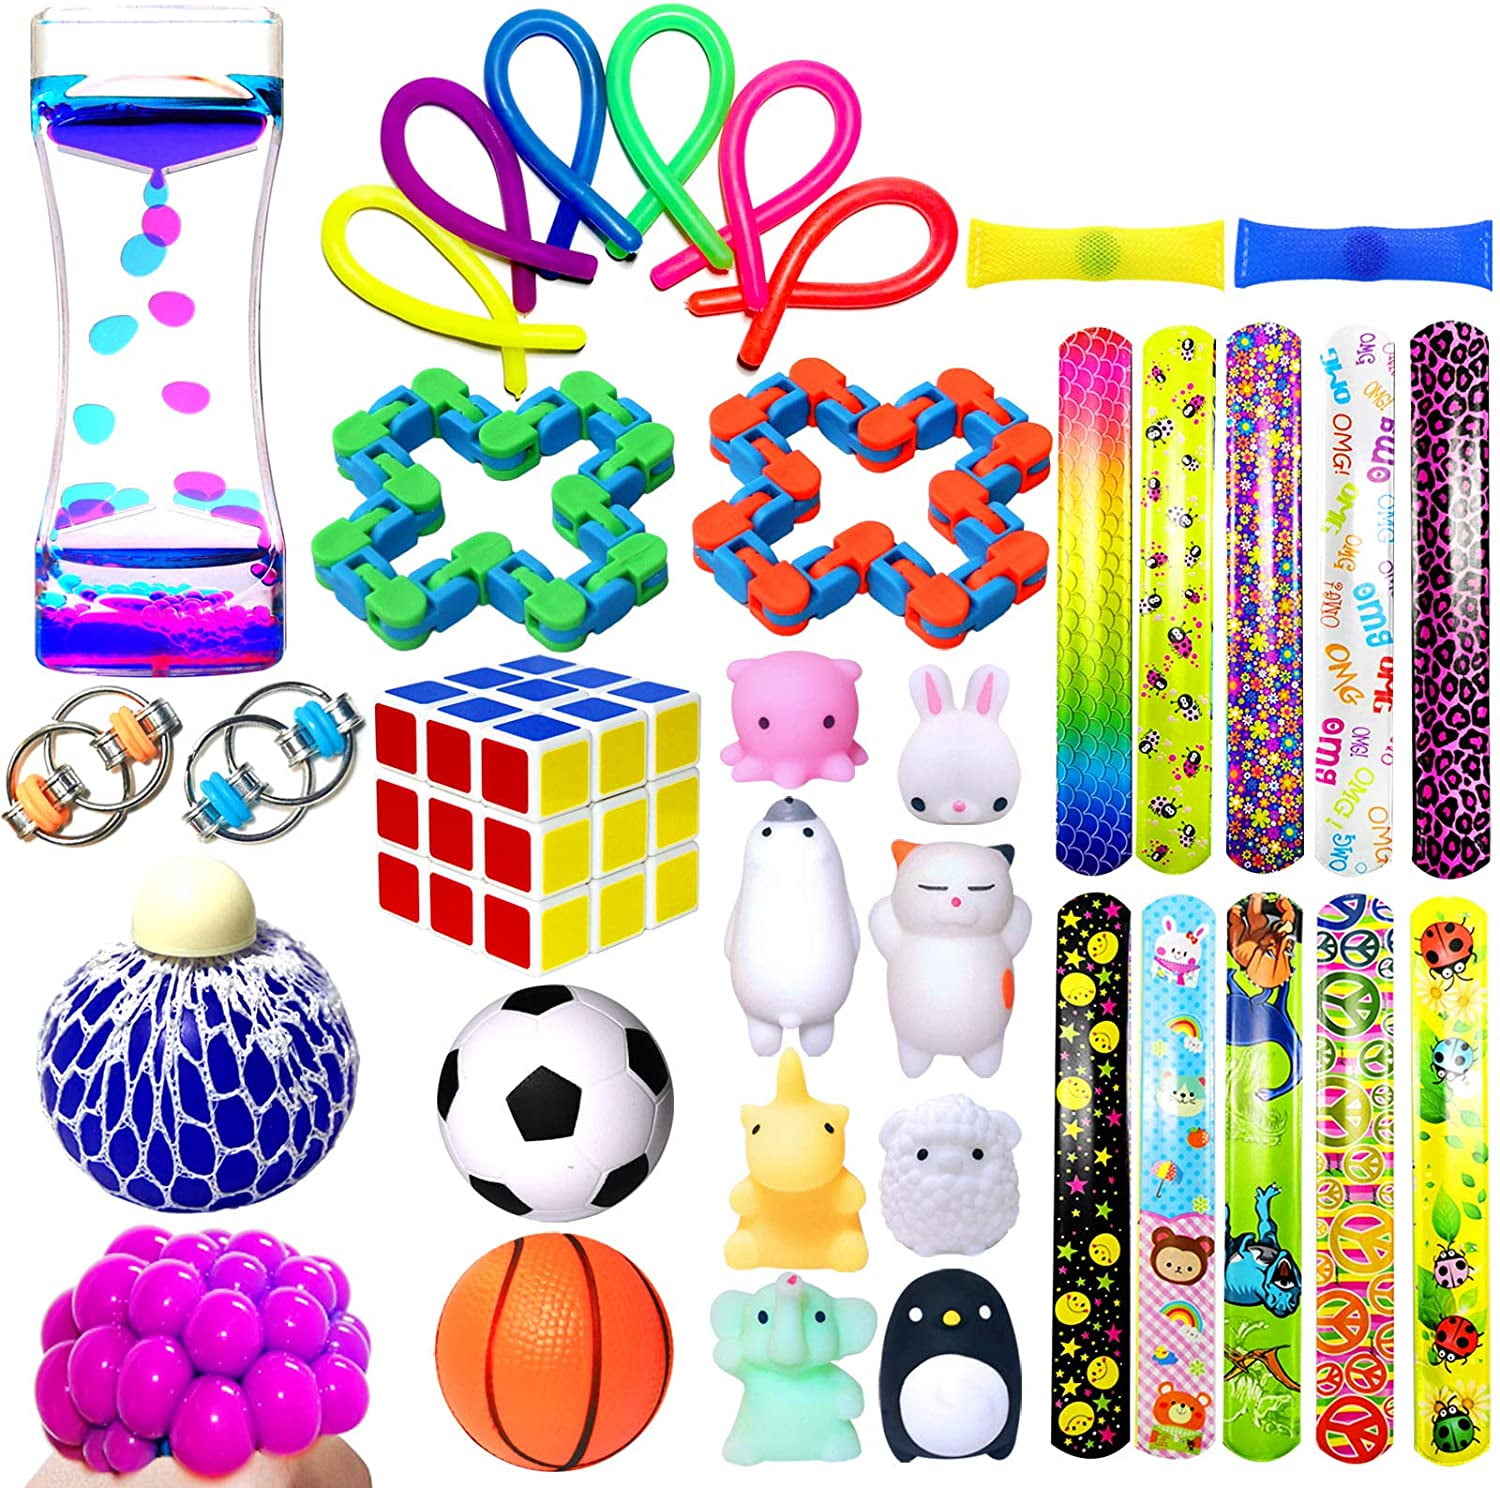 Push Pop Bubble Fidget Sensory Toy Stress Relief and Anti-Anxiety Tools for Kids and Adults With Fidget Key Chain Rainbow Color Silicone Squeeze & Squishy Popping Toys for Autism Pop It Fidget Toy